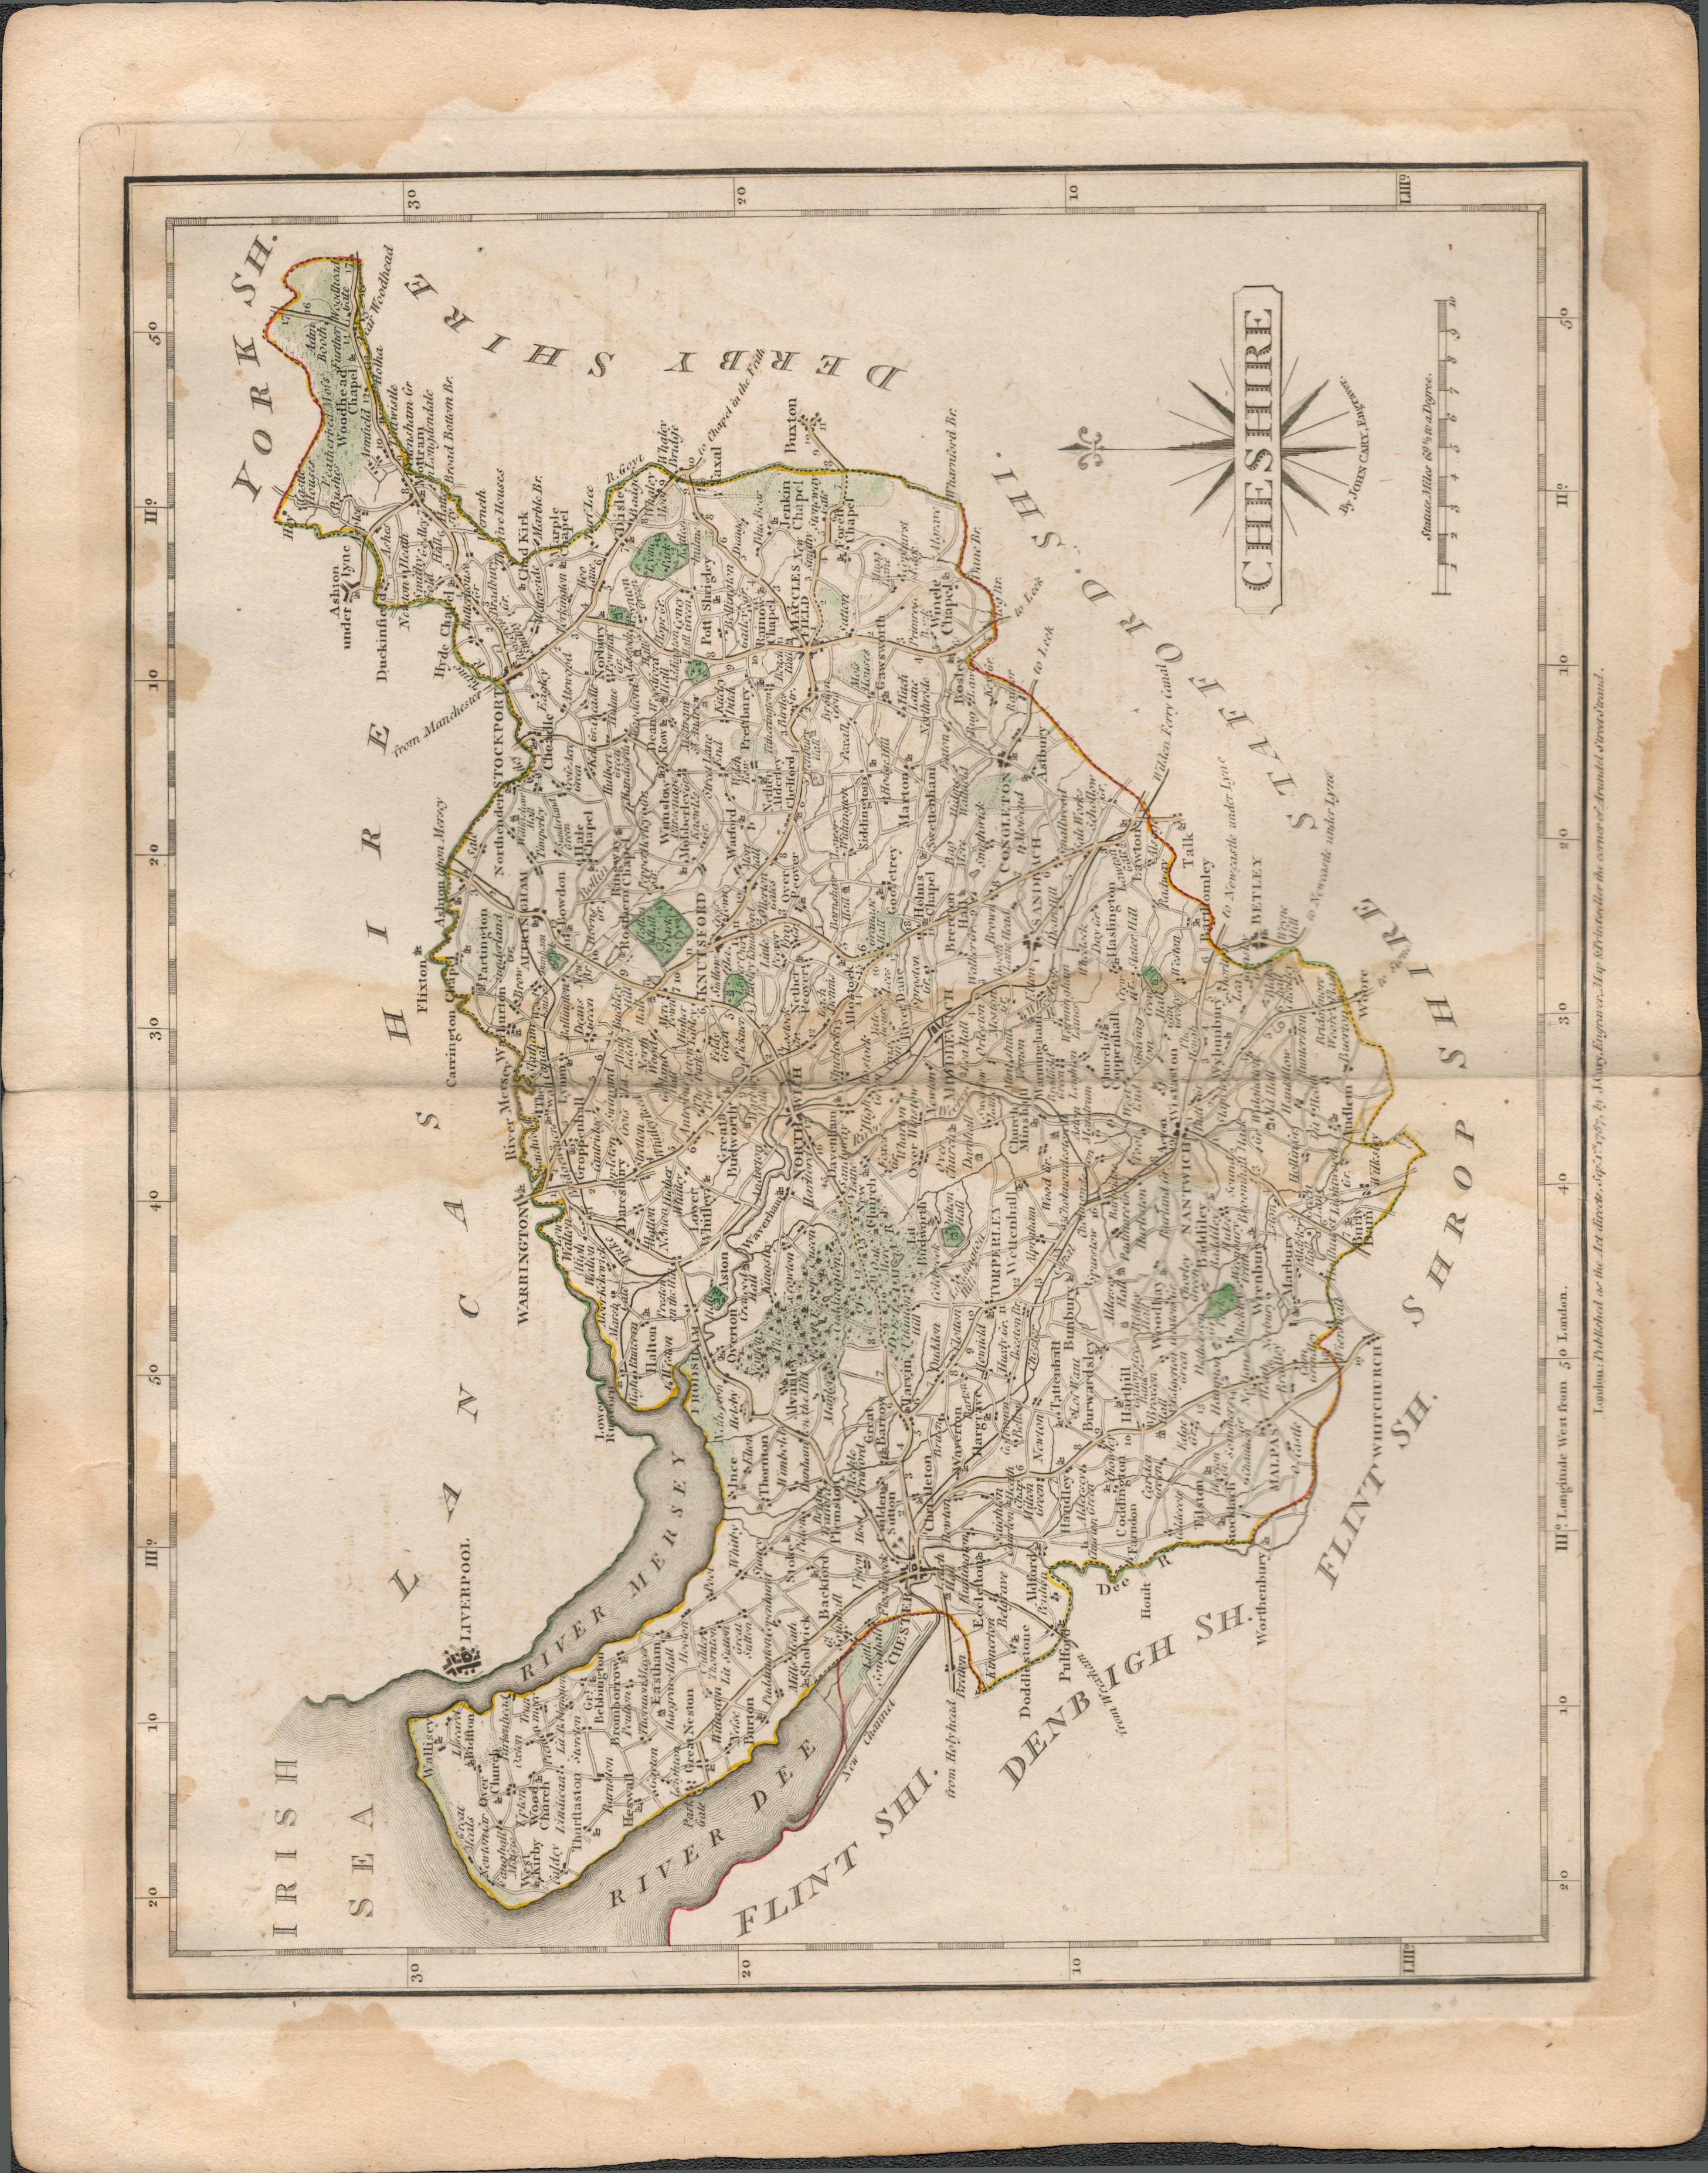 County of Cheshire John Cary 1787 Antique Hand Coloured Map.